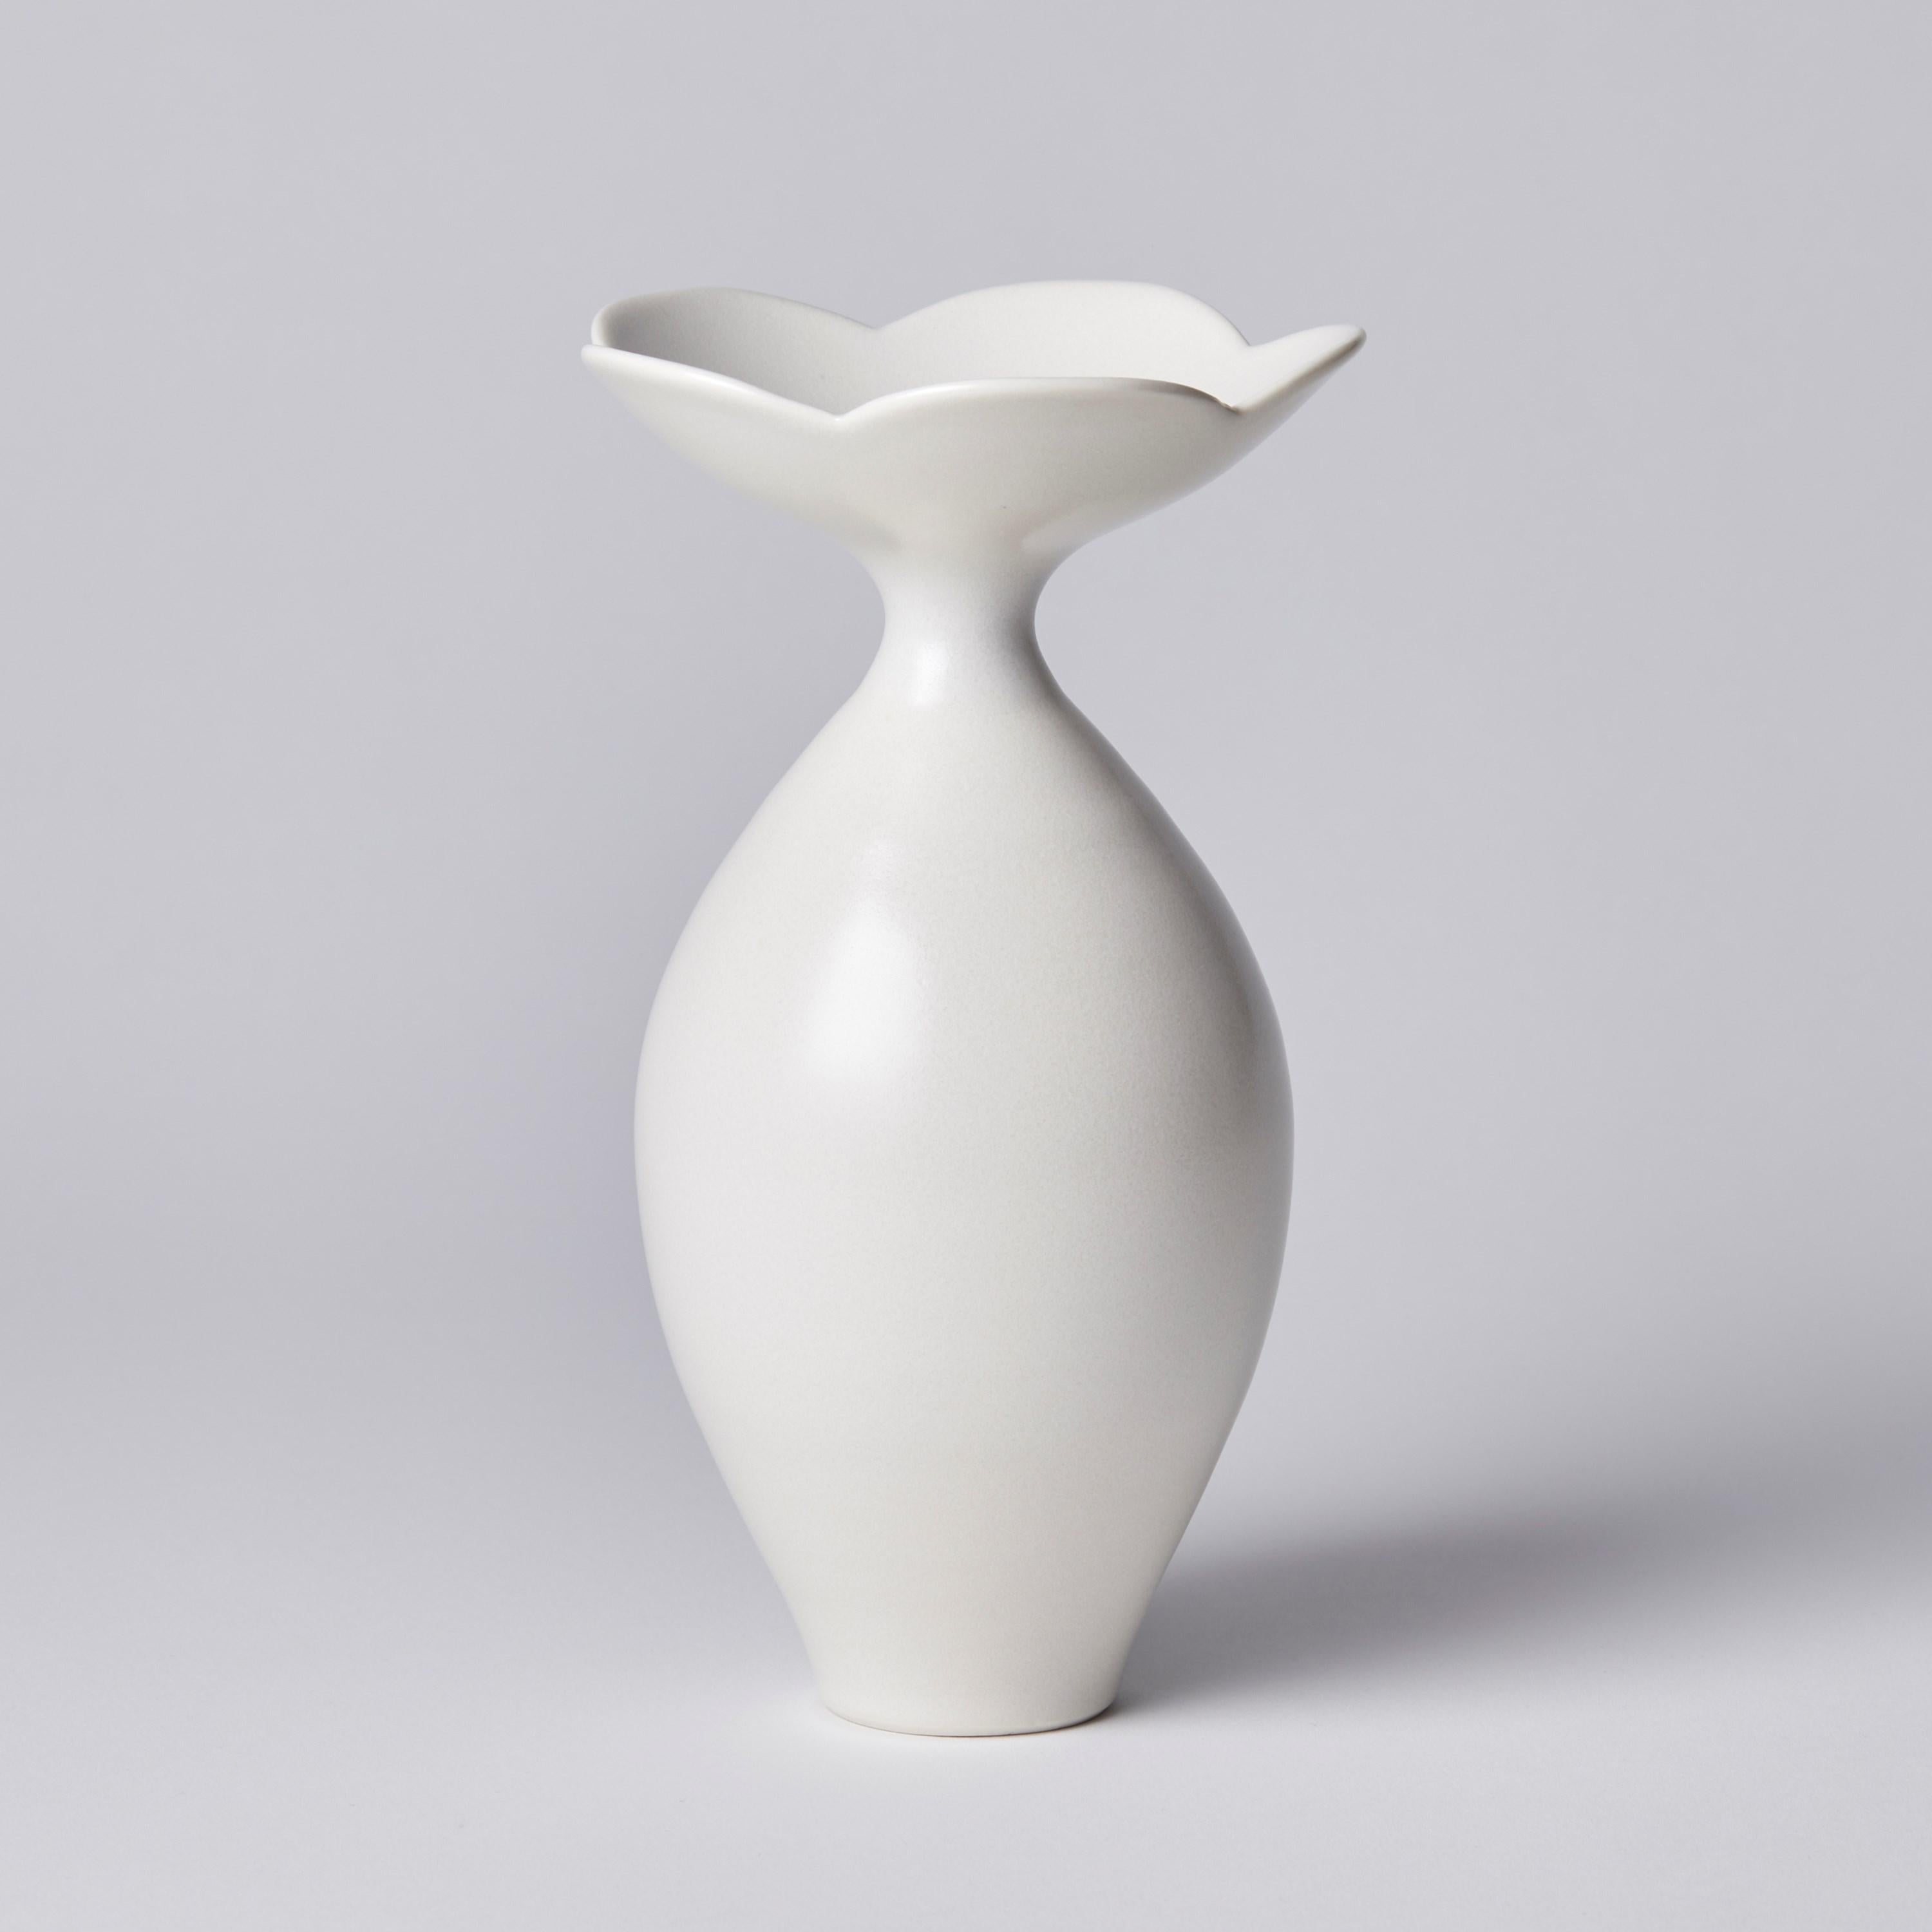 ‘Vase with Foliate Rim I' is a unique porcelain sculptural vessel by the British artist, Vivienne Foley. 

Vivienne Foley is based in Gloucestershire where she produces exquisite ceramic sculpture. Although in essence they are often functional